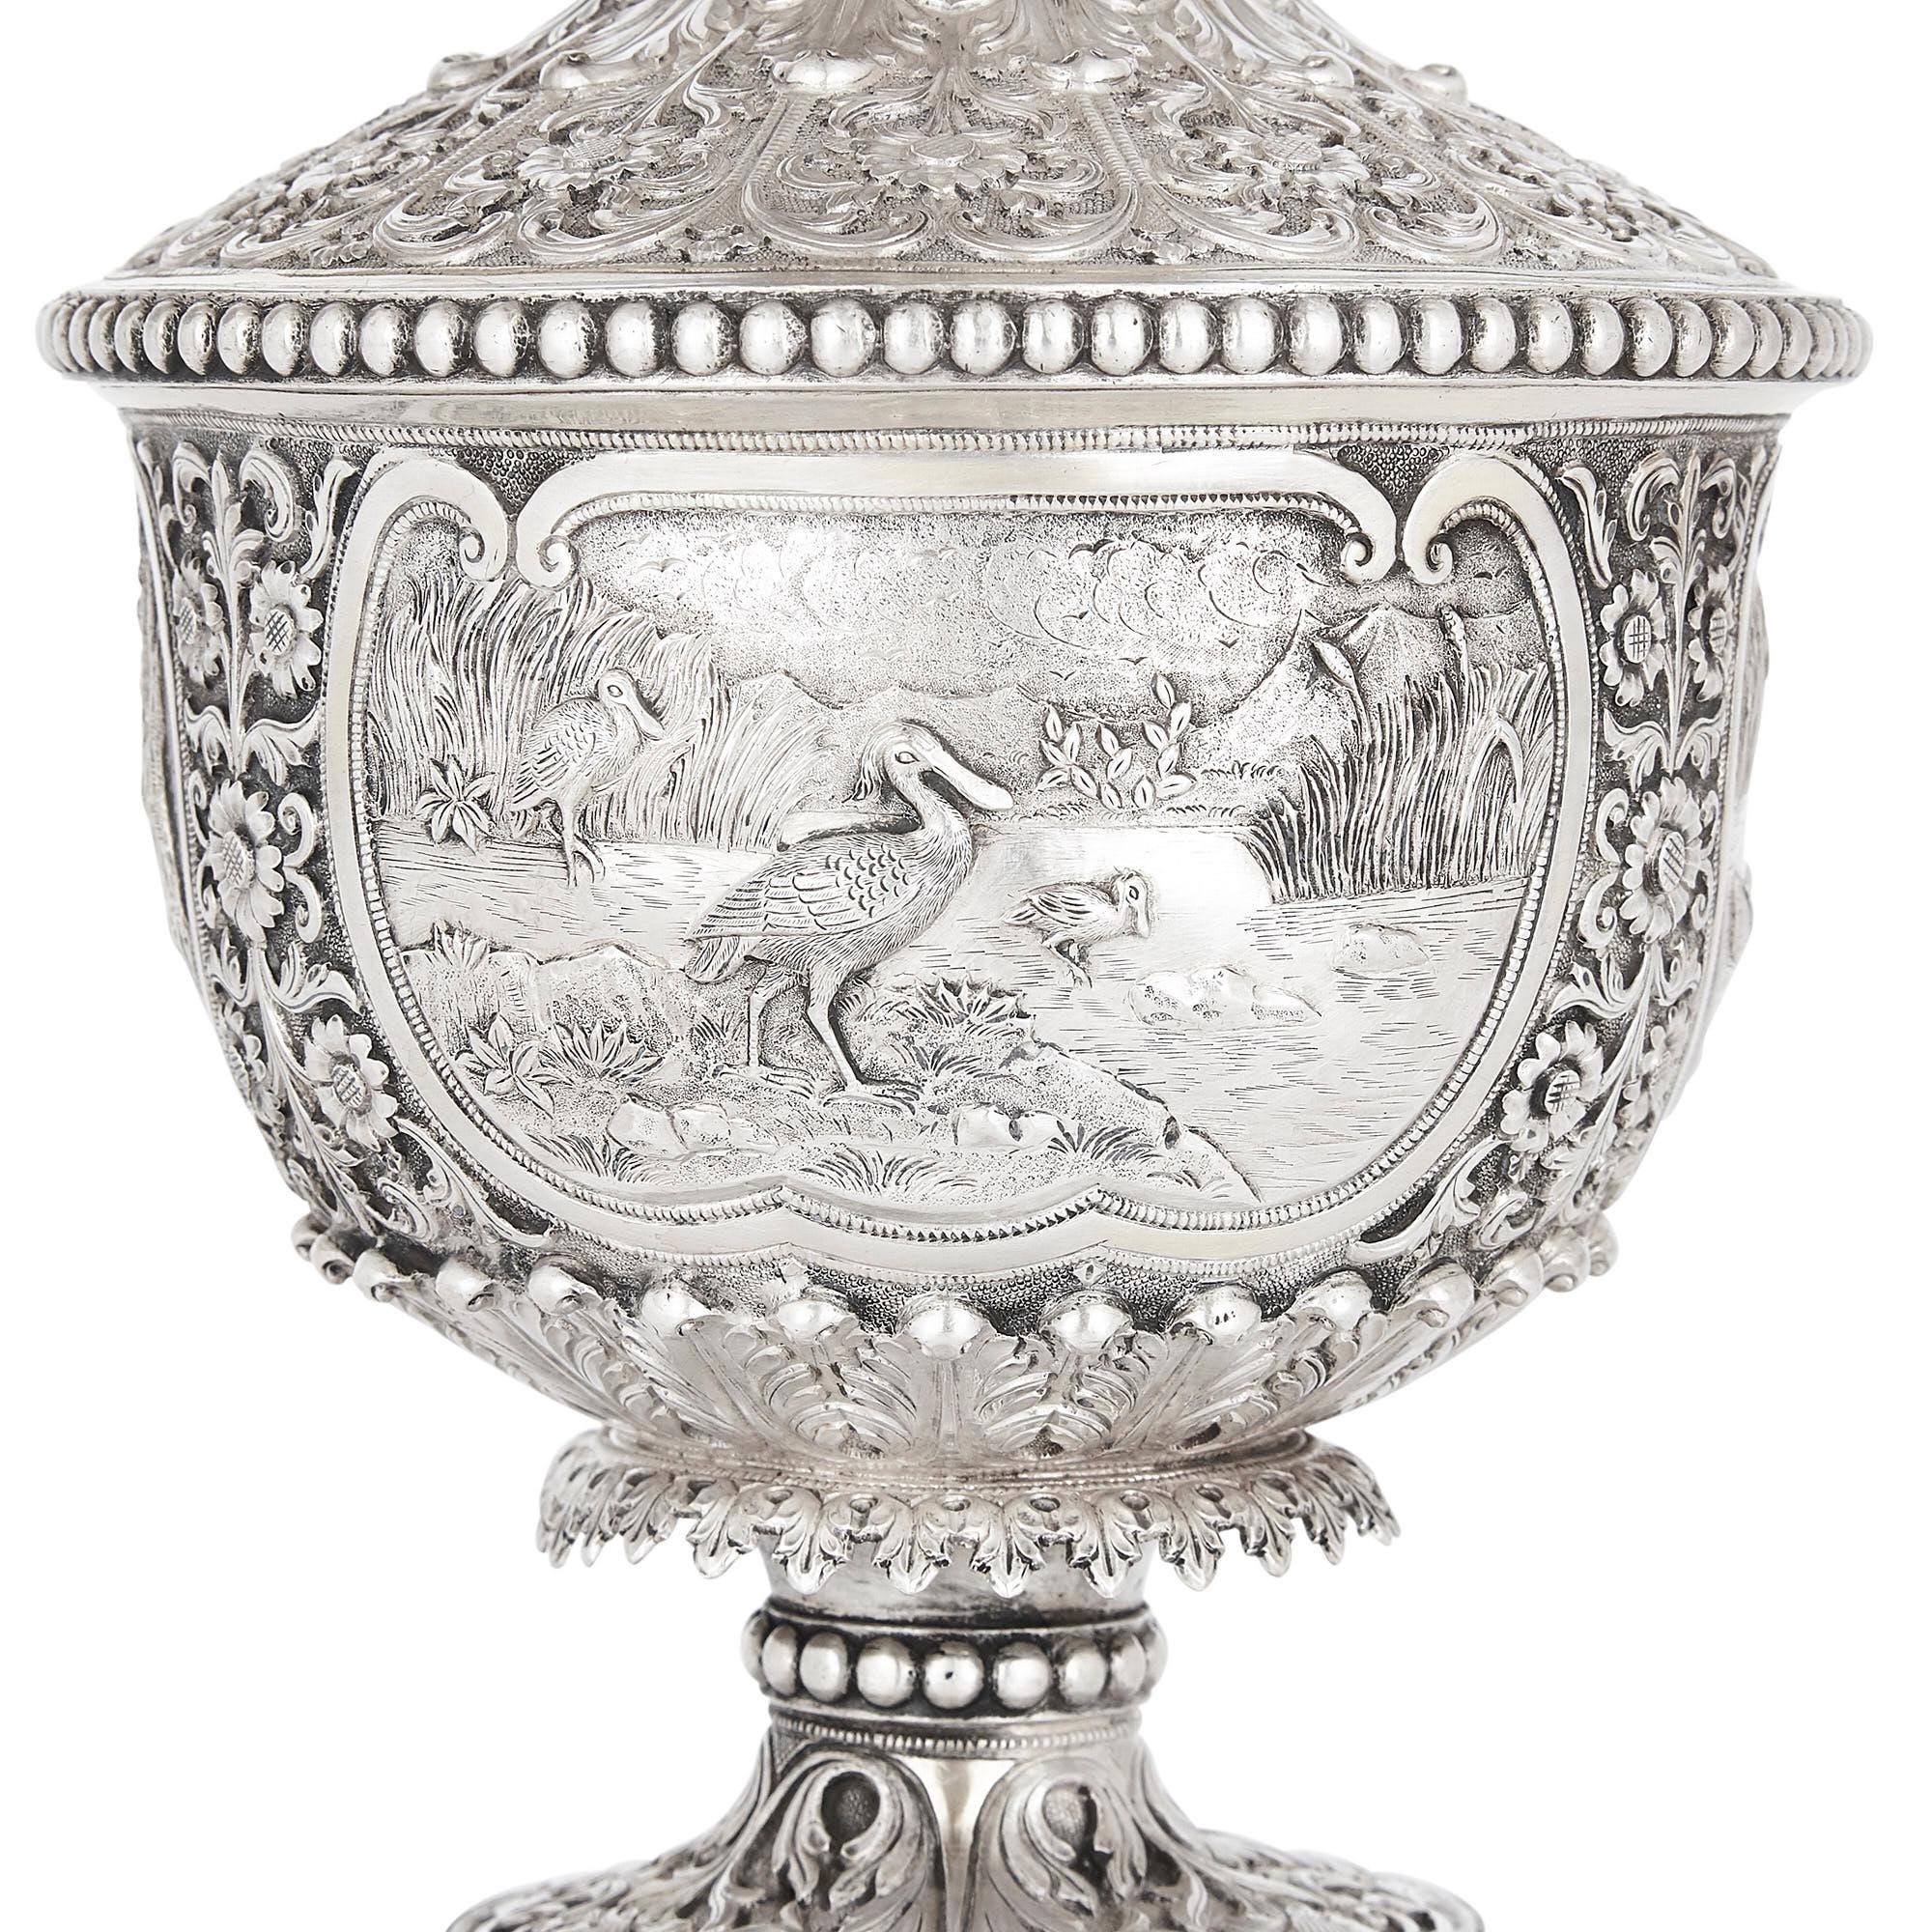 19th Century Indian Engraved Silver Table Fountain by Oomersi Mawji & Sons For Sale